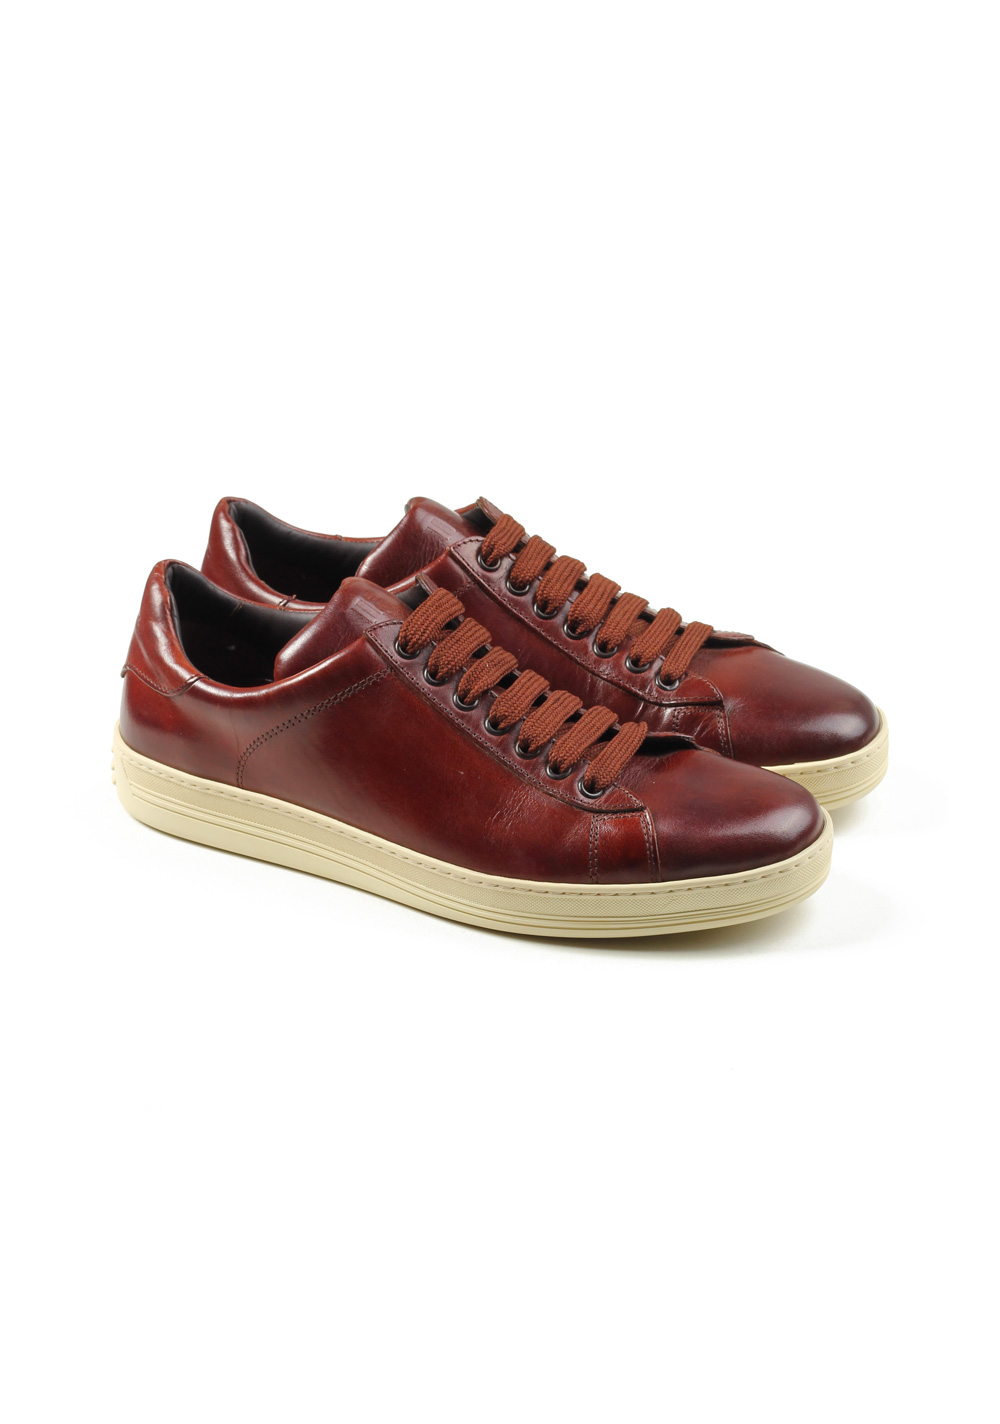 TOM FORD Russel Low Top Brown Leather Sneaker Shoes Size 7 UK / 8 U.S. | Costume Limité